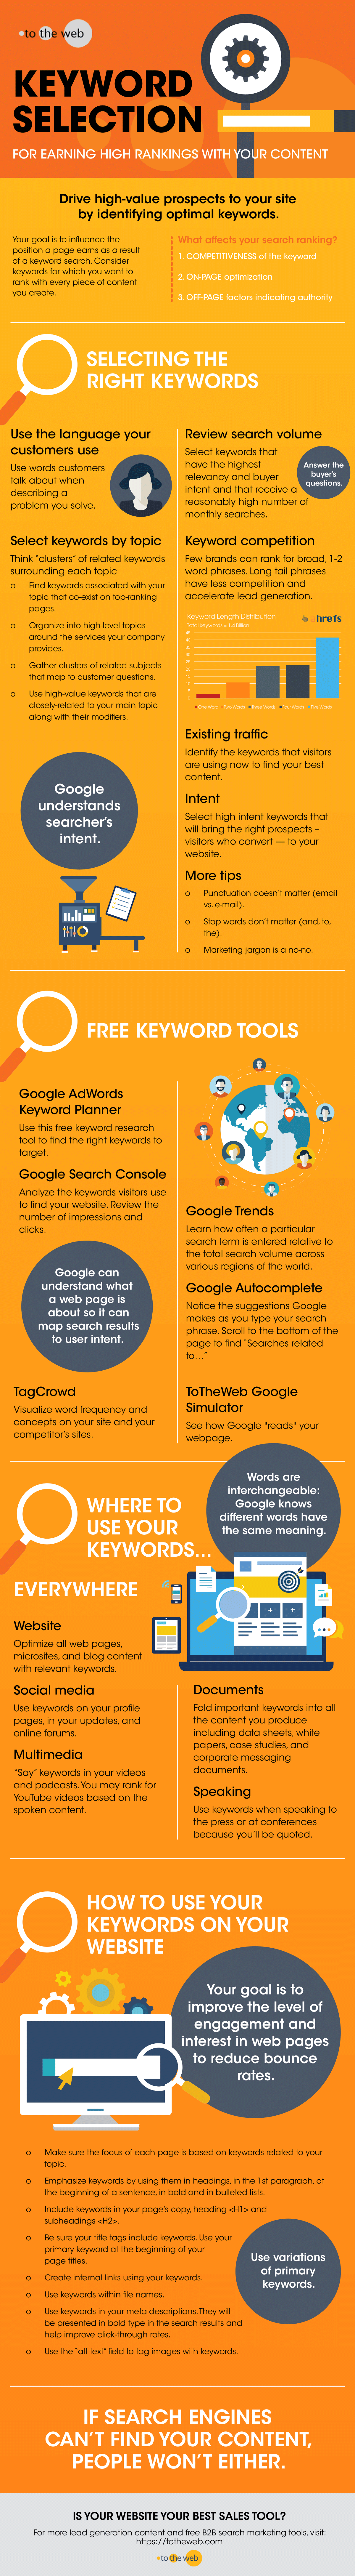 Everything we do in SEO starts with Smart Keyword Selection | A Best Practice Guide for Modern SEO - infographic